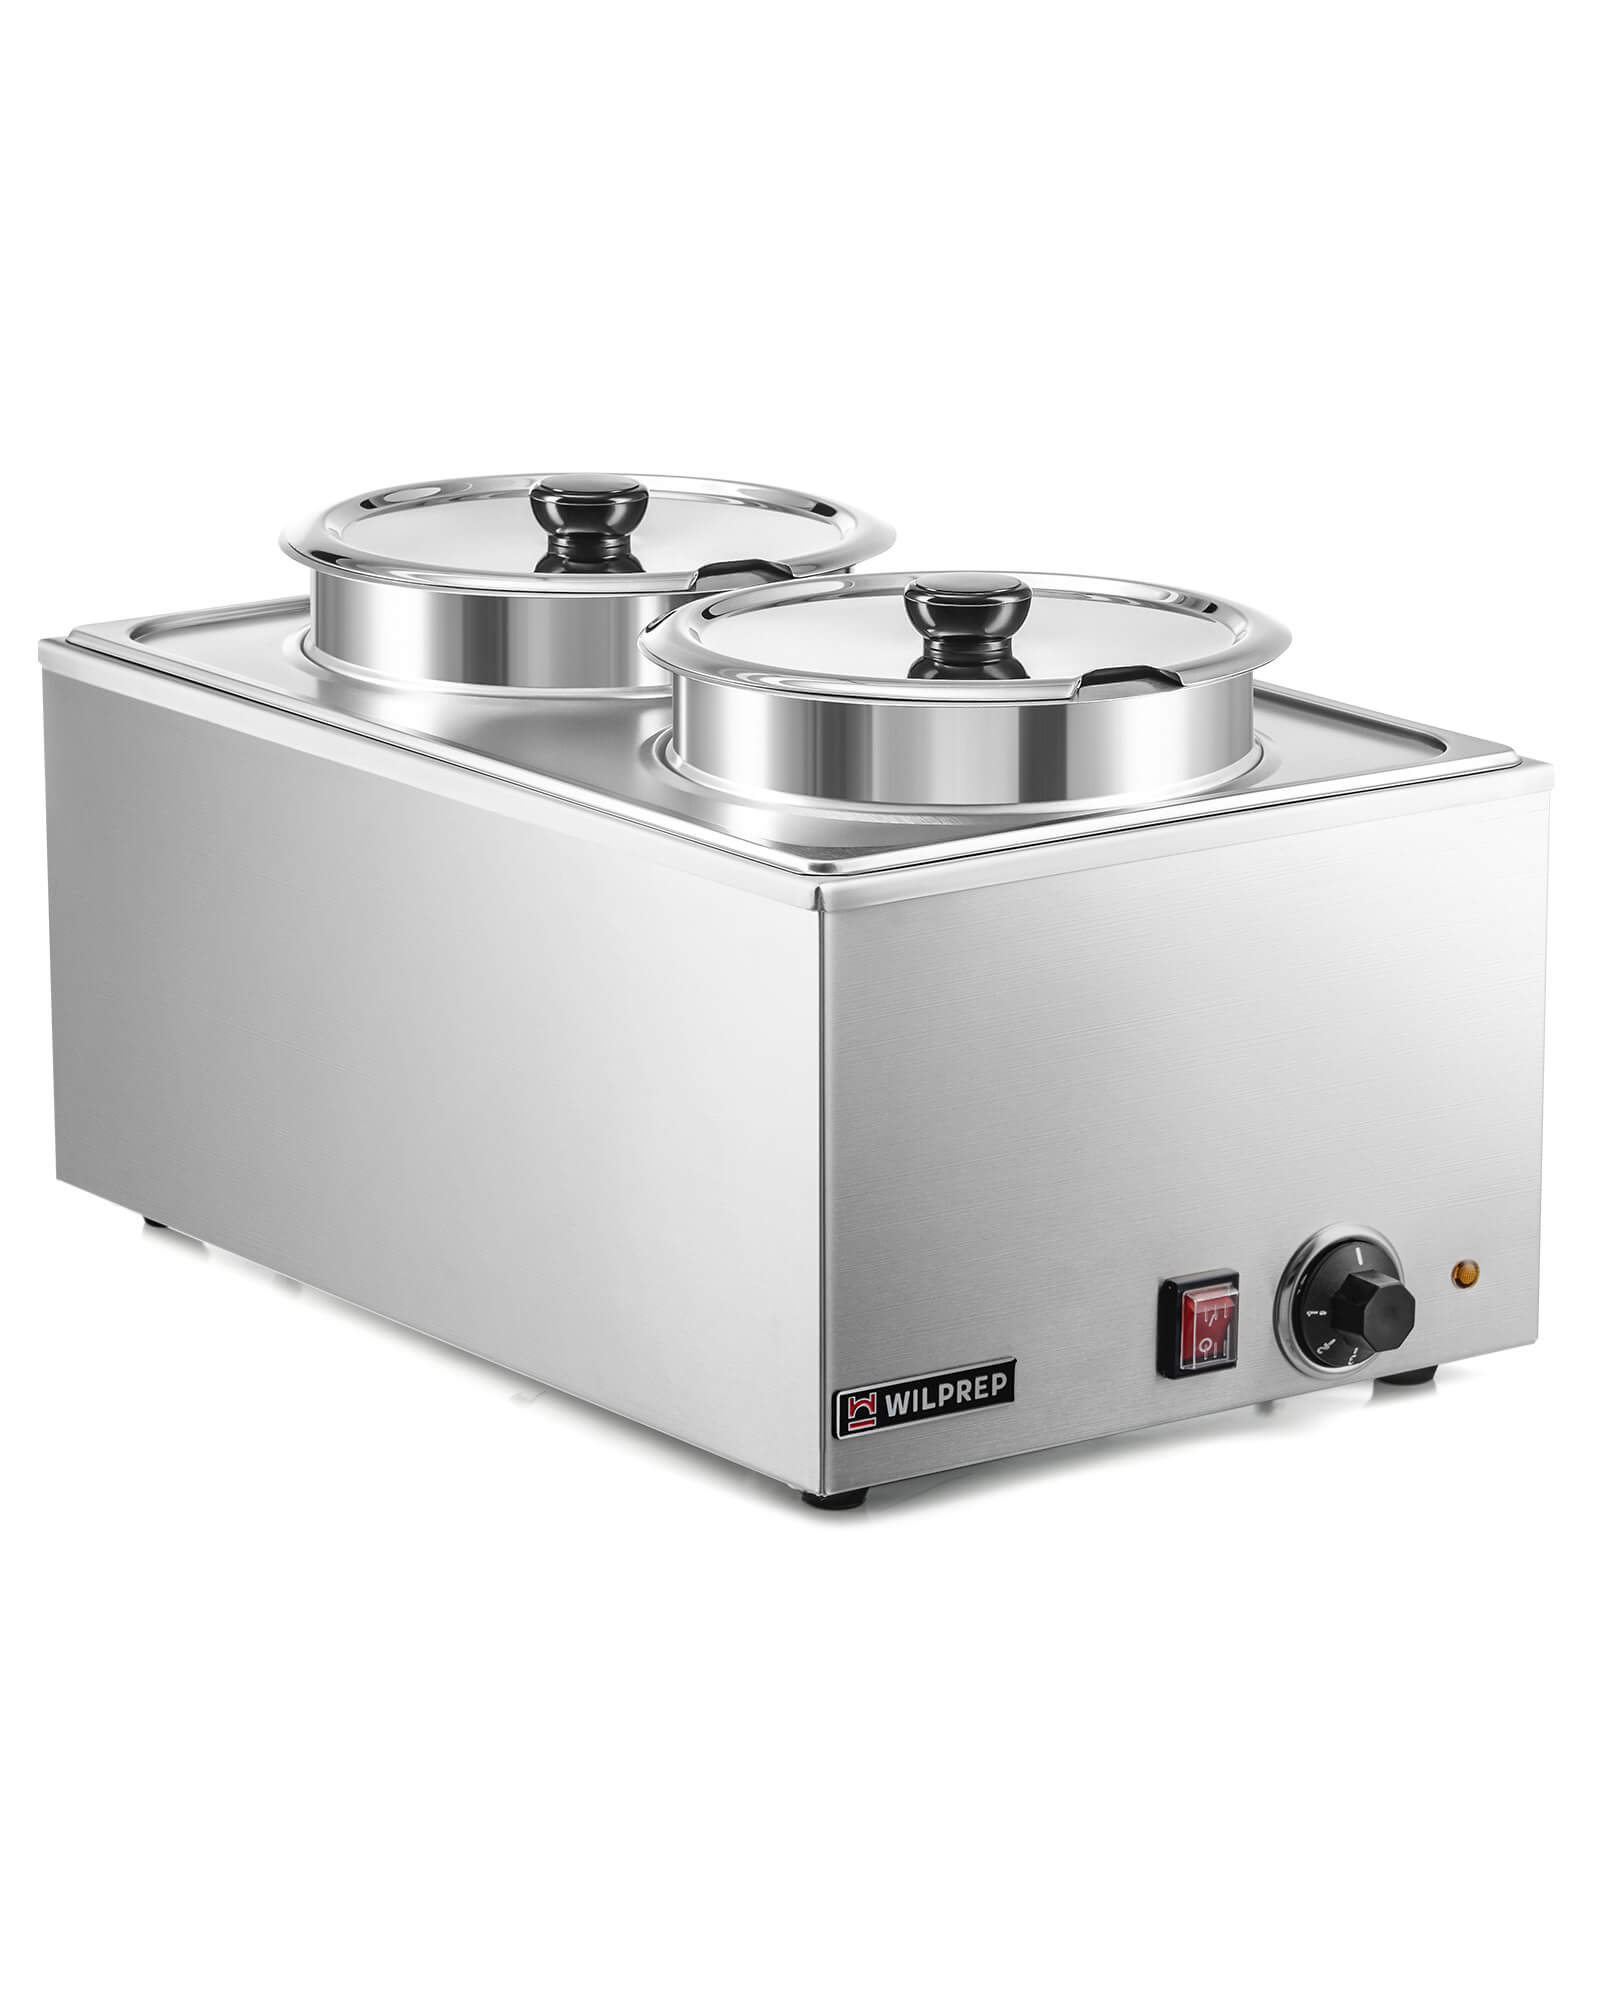 Twin Well 15 qt. Electric Countertop Food Warmer with 2 Insets & Covers